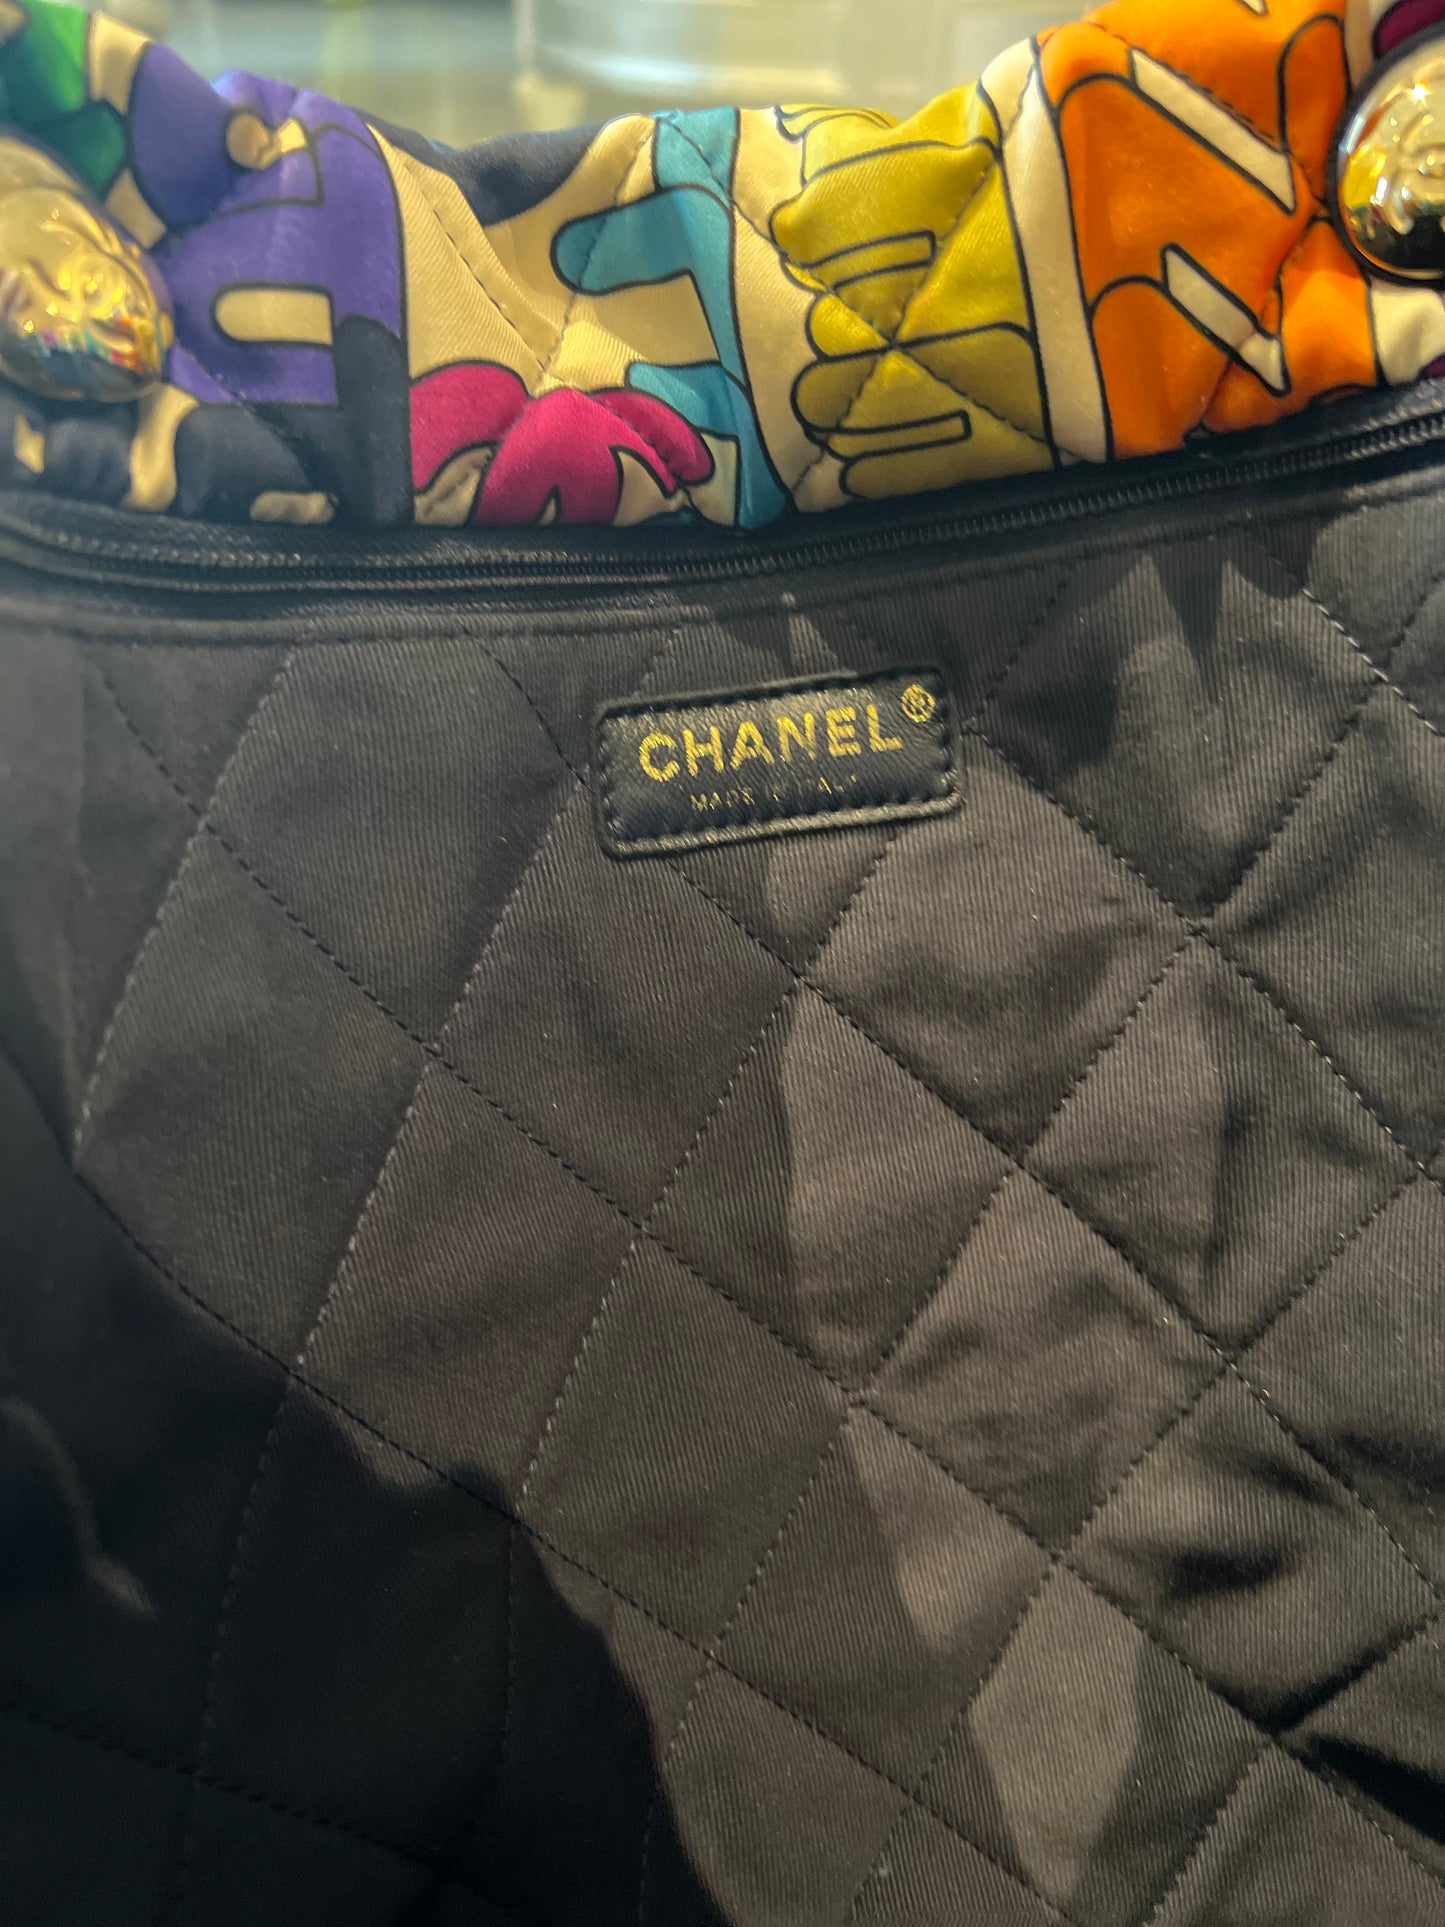 CHANEL limited edition tote